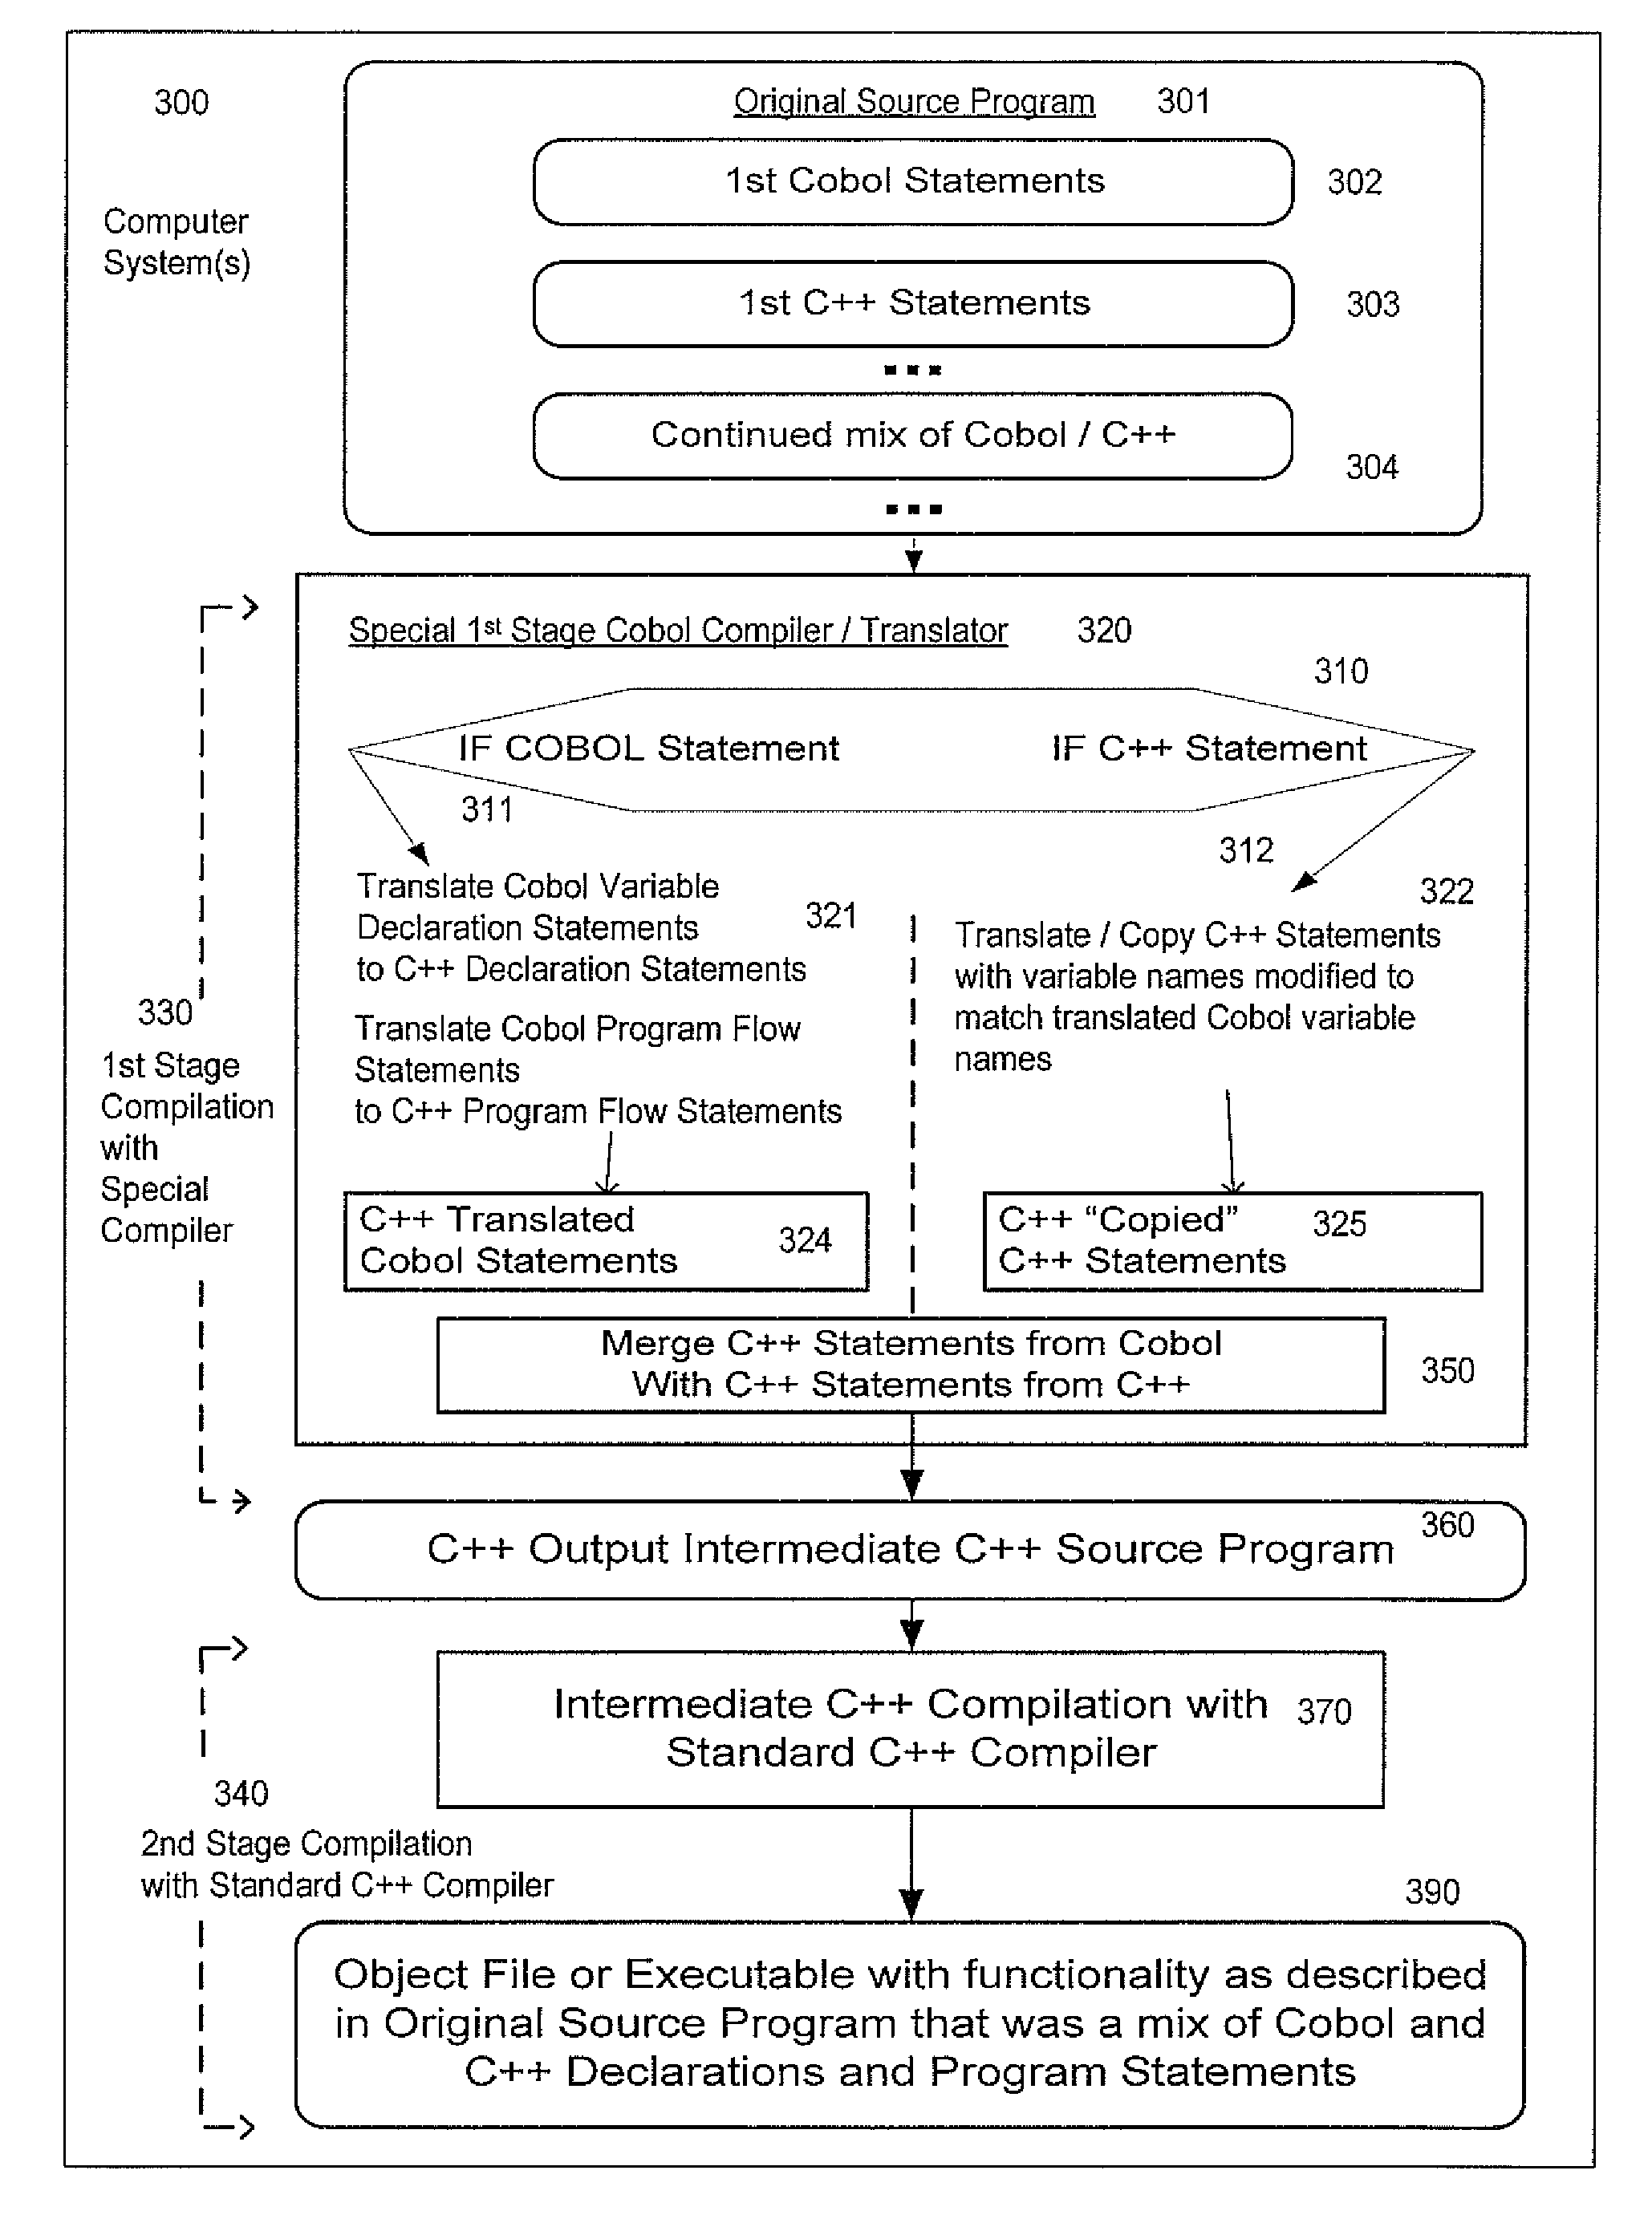 METHOD FOR ENABLING COMPILATION OF A COBOL SOURCE PROGRAM UTILIZING A TWO-STAGE COMPILATION PROCESS, THE COBOL SOURCE PROGRAM INCLUDING A MIX OF COBOL, C++ or JAVA STATEMENTS, AND OPTIONAL OPENMP DIRECTIVES